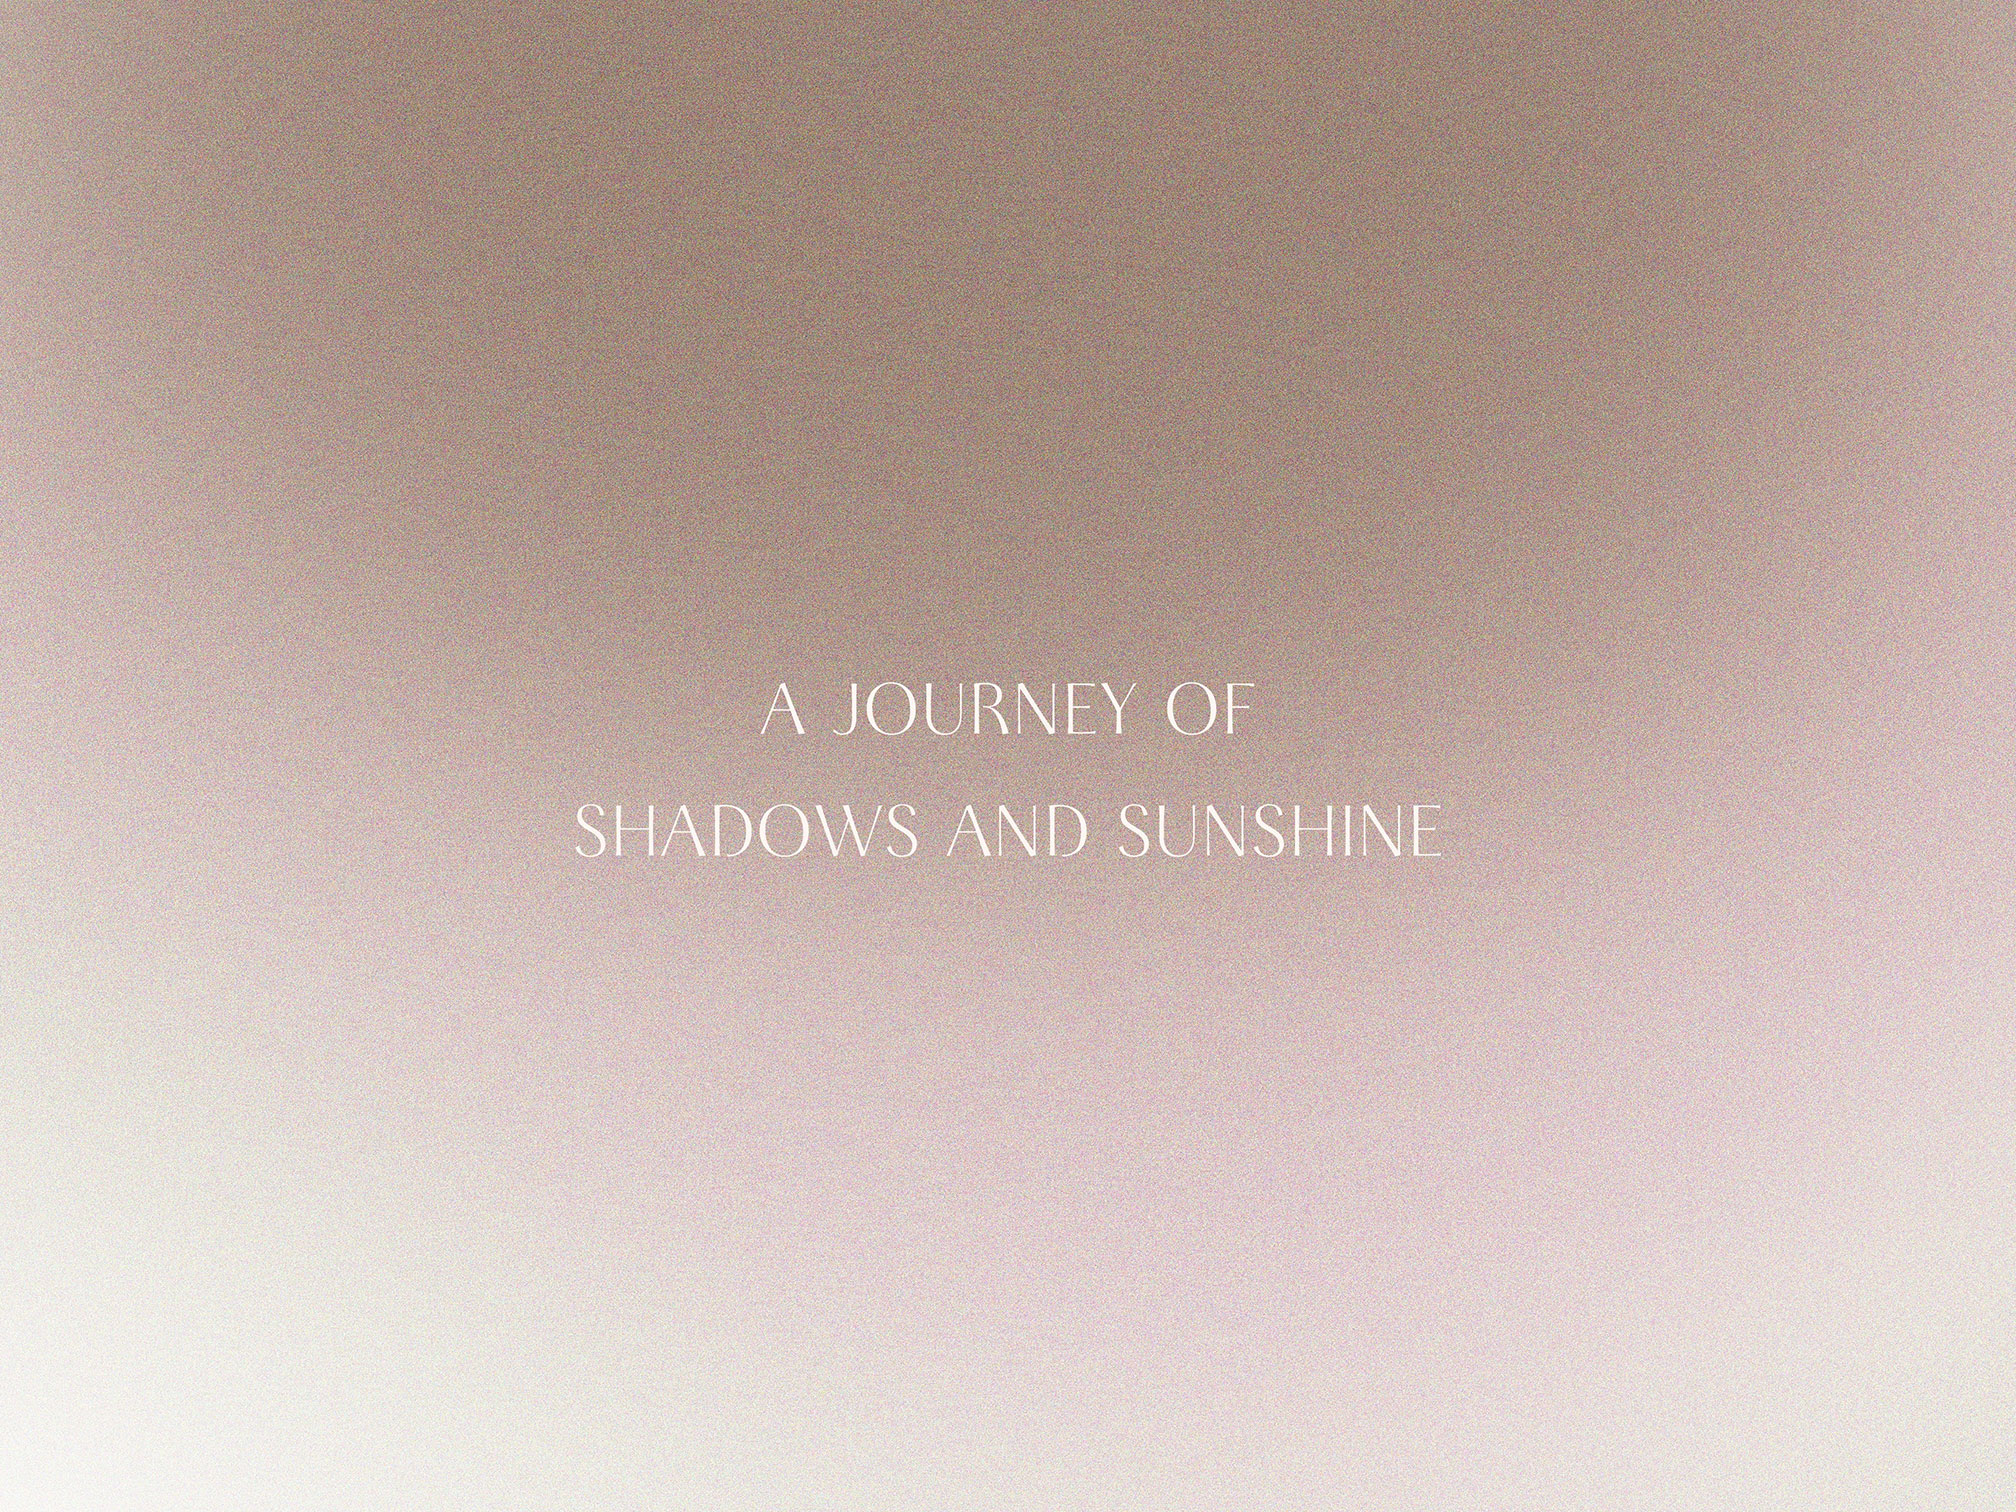 A JOURNEY OF SHADOWS AND SUNSHINE